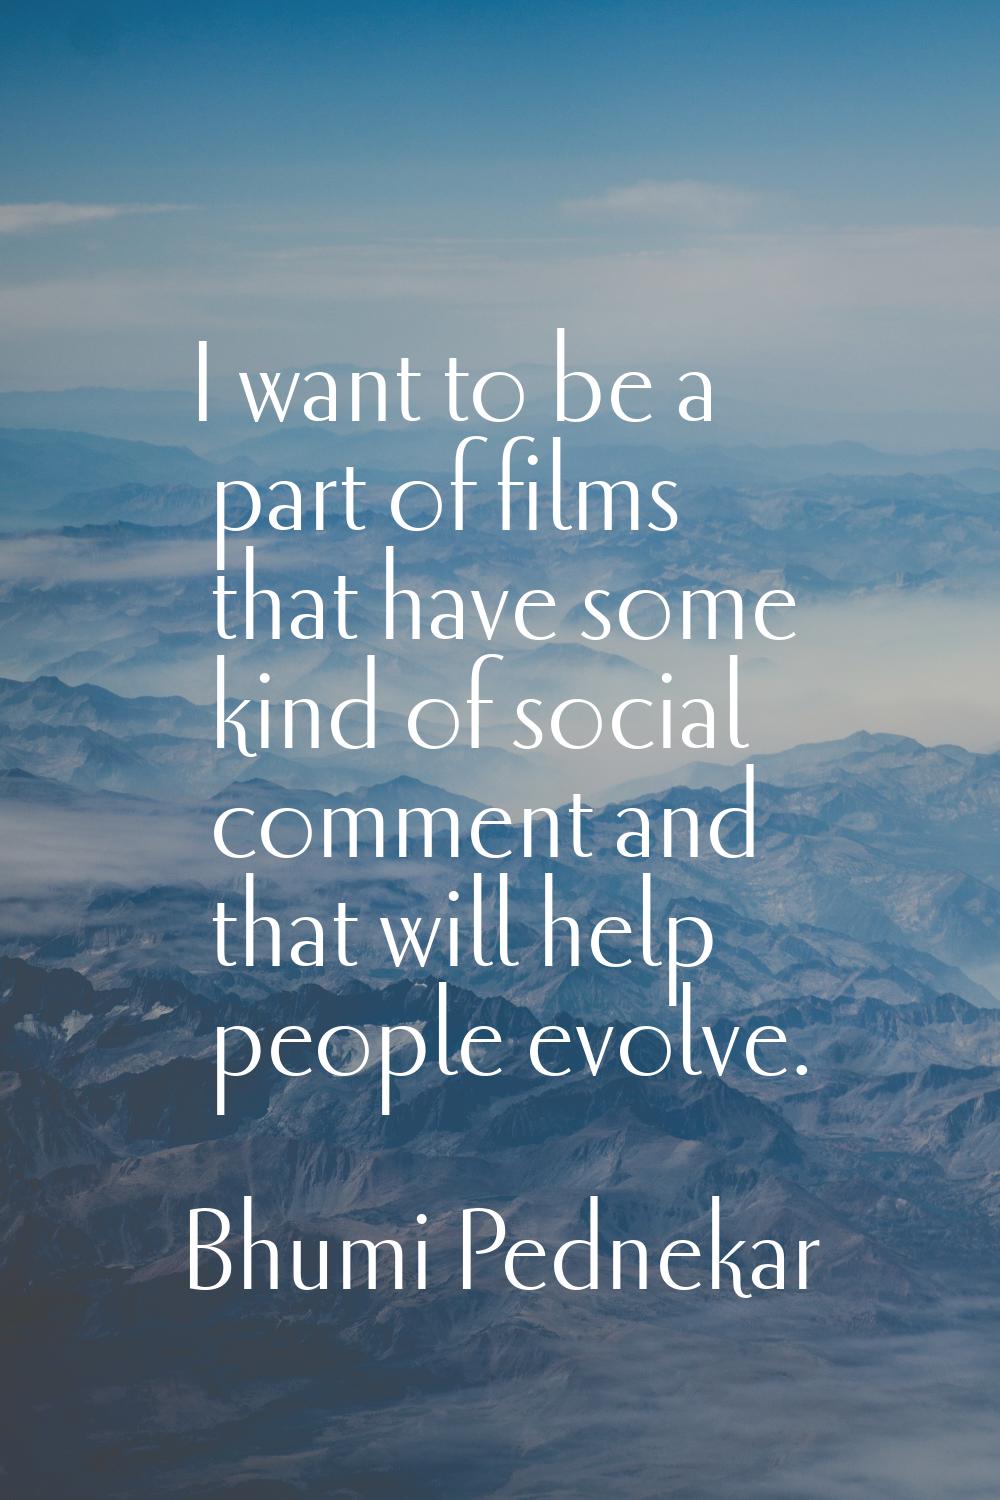 I want to be a part of films that have some kind of social comment and that will help people evolve